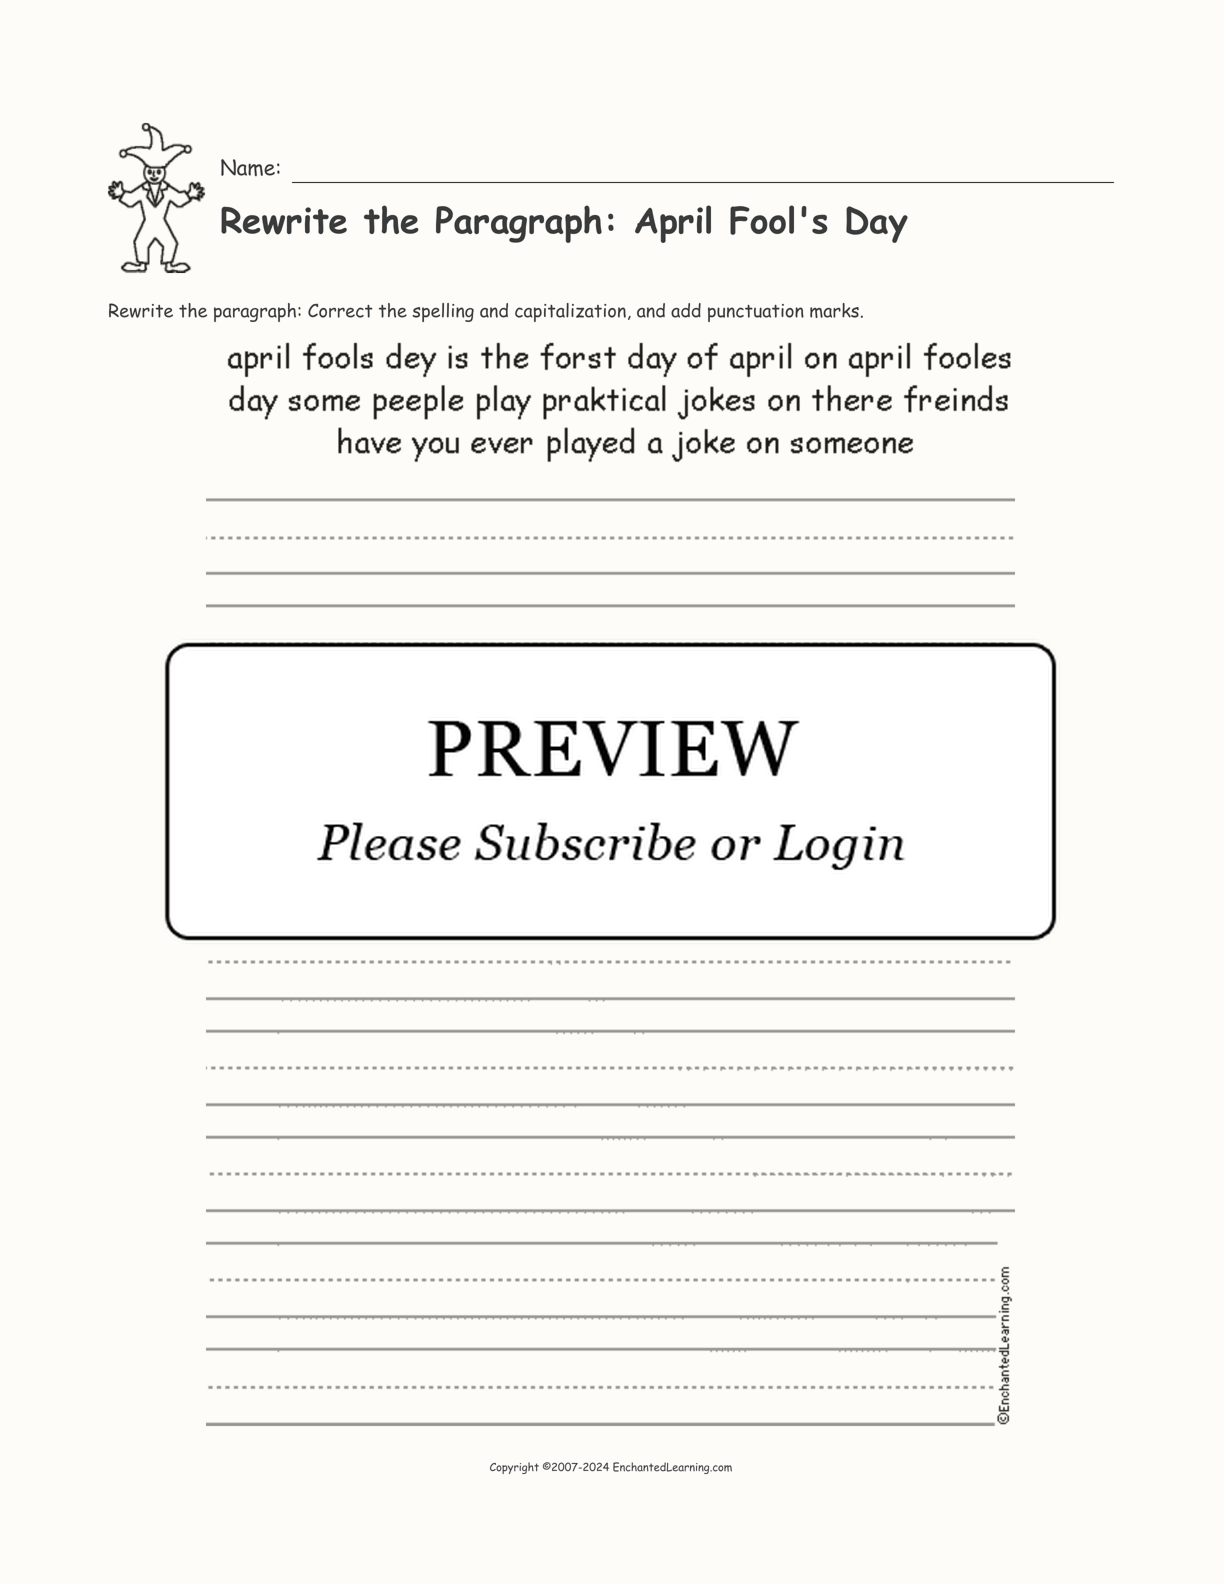 Rewrite the Paragraph: April Fool's Day interactive worksheet page 1